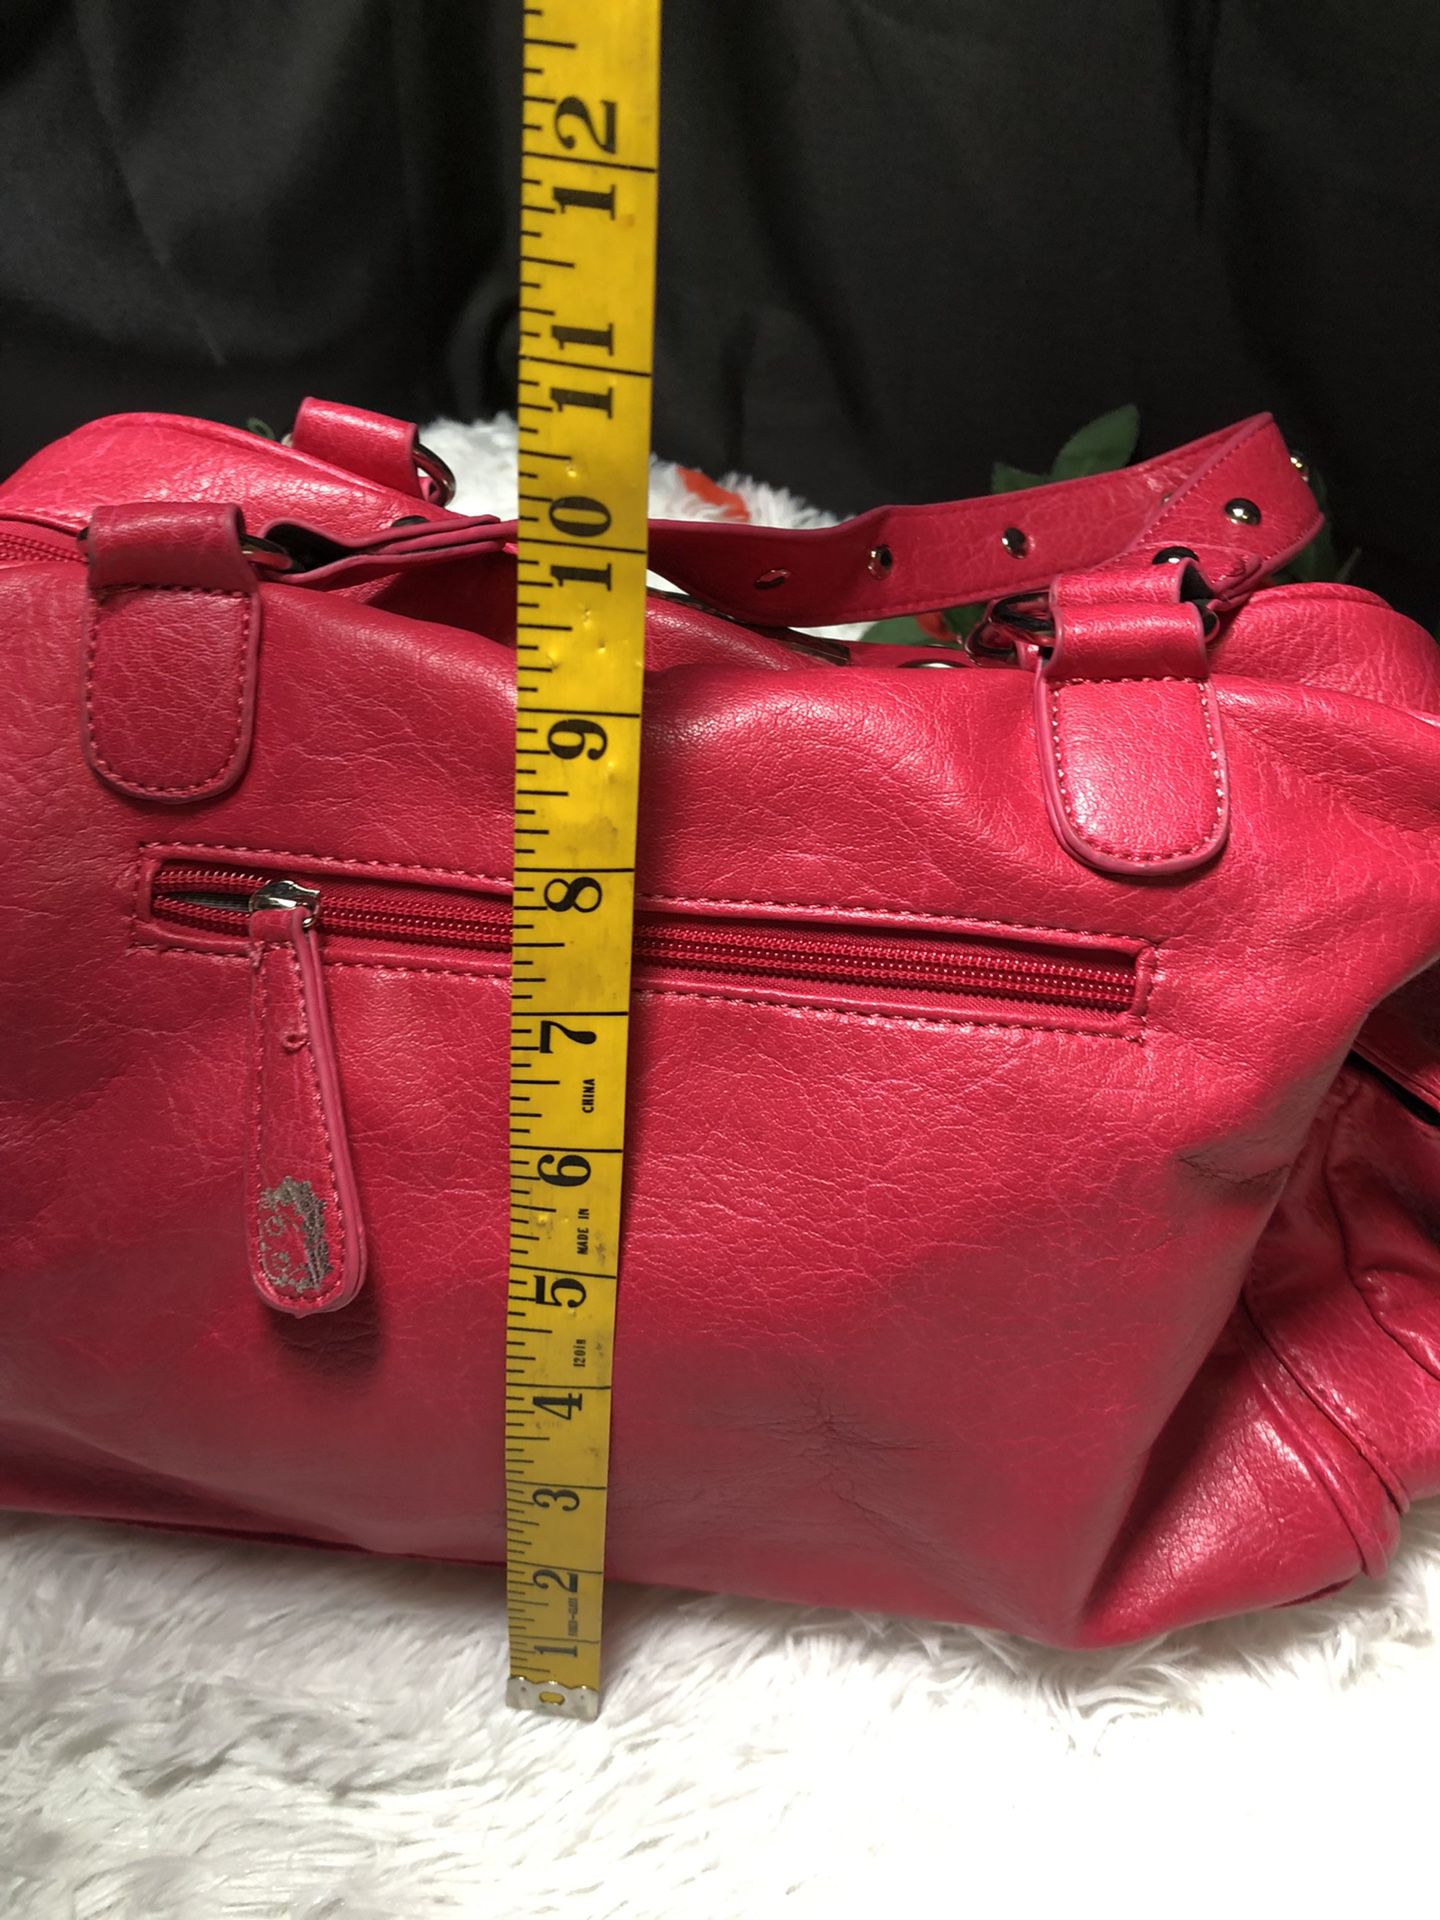 Betty Boop pink/black duffle bag for Sale in Round Rock, TX - OfferUp